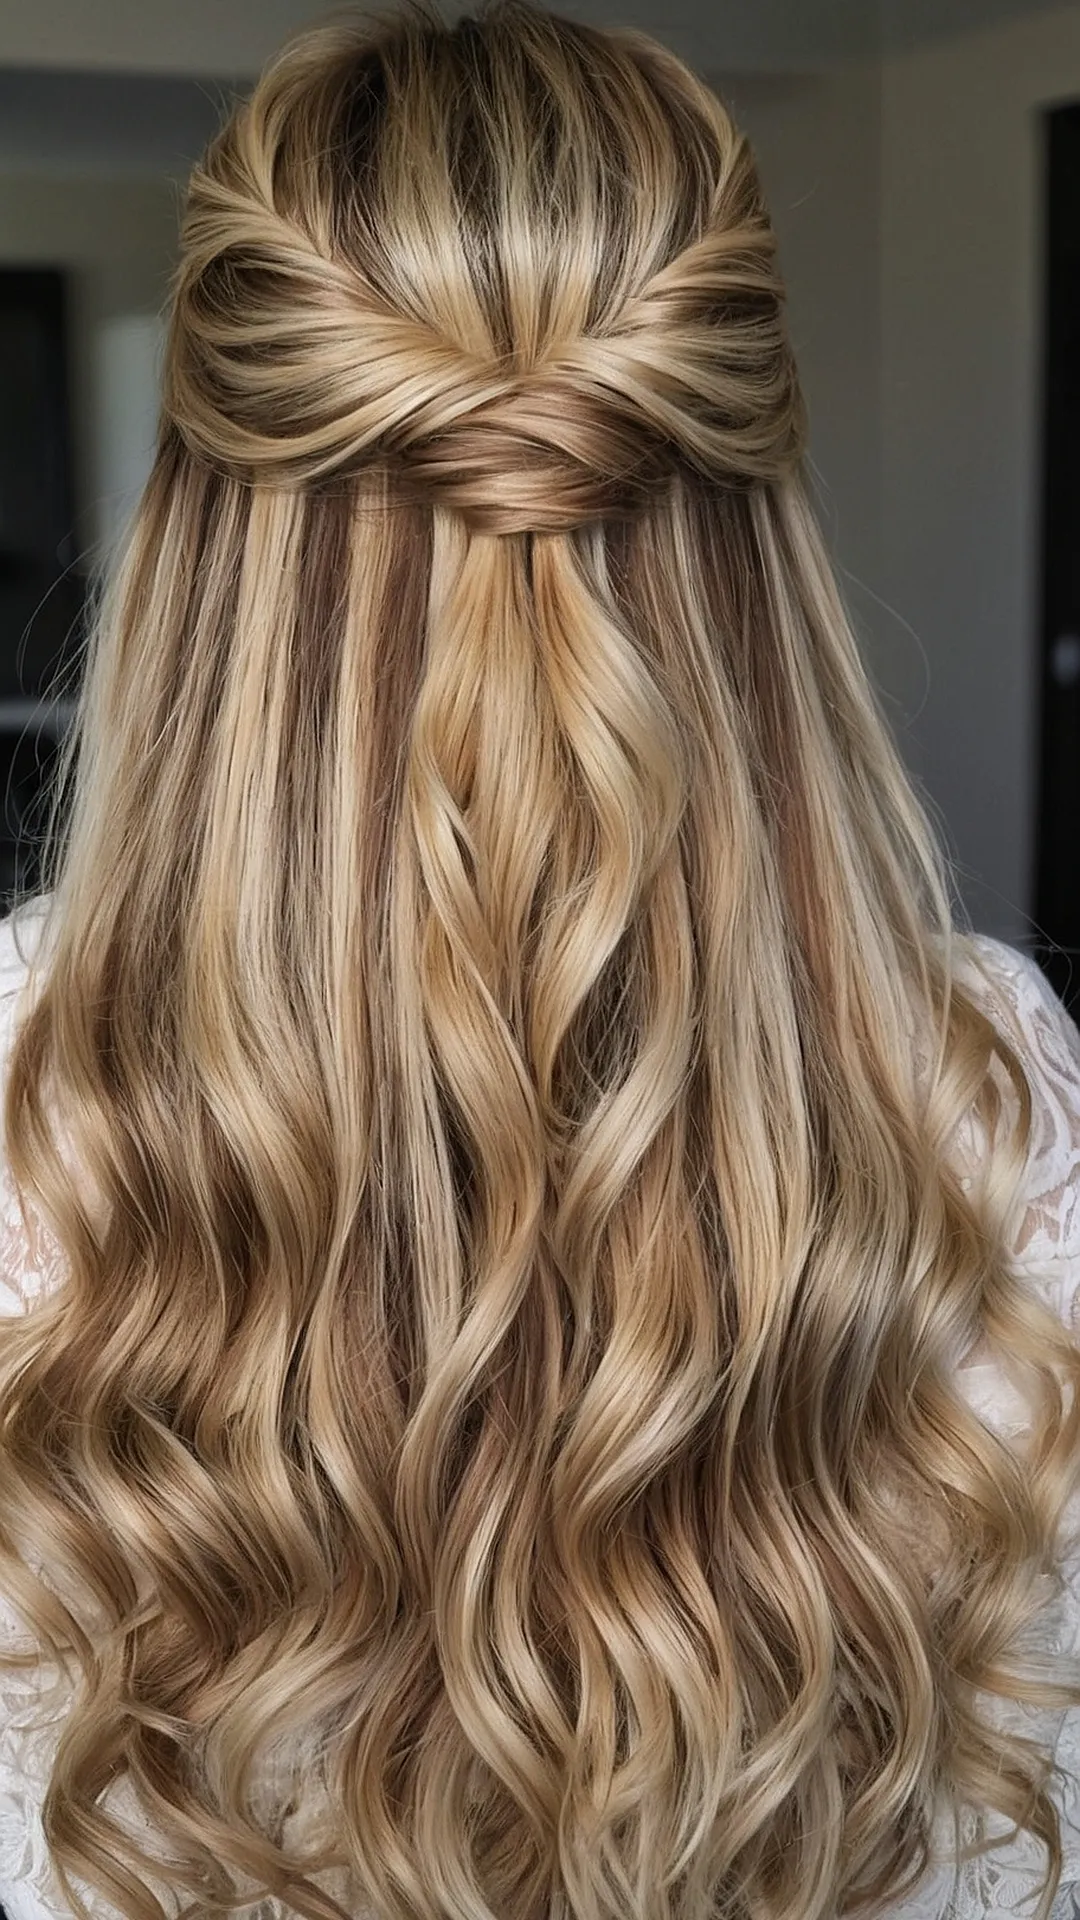 Tying the Knot: Half Up Hairstyles Inspiration